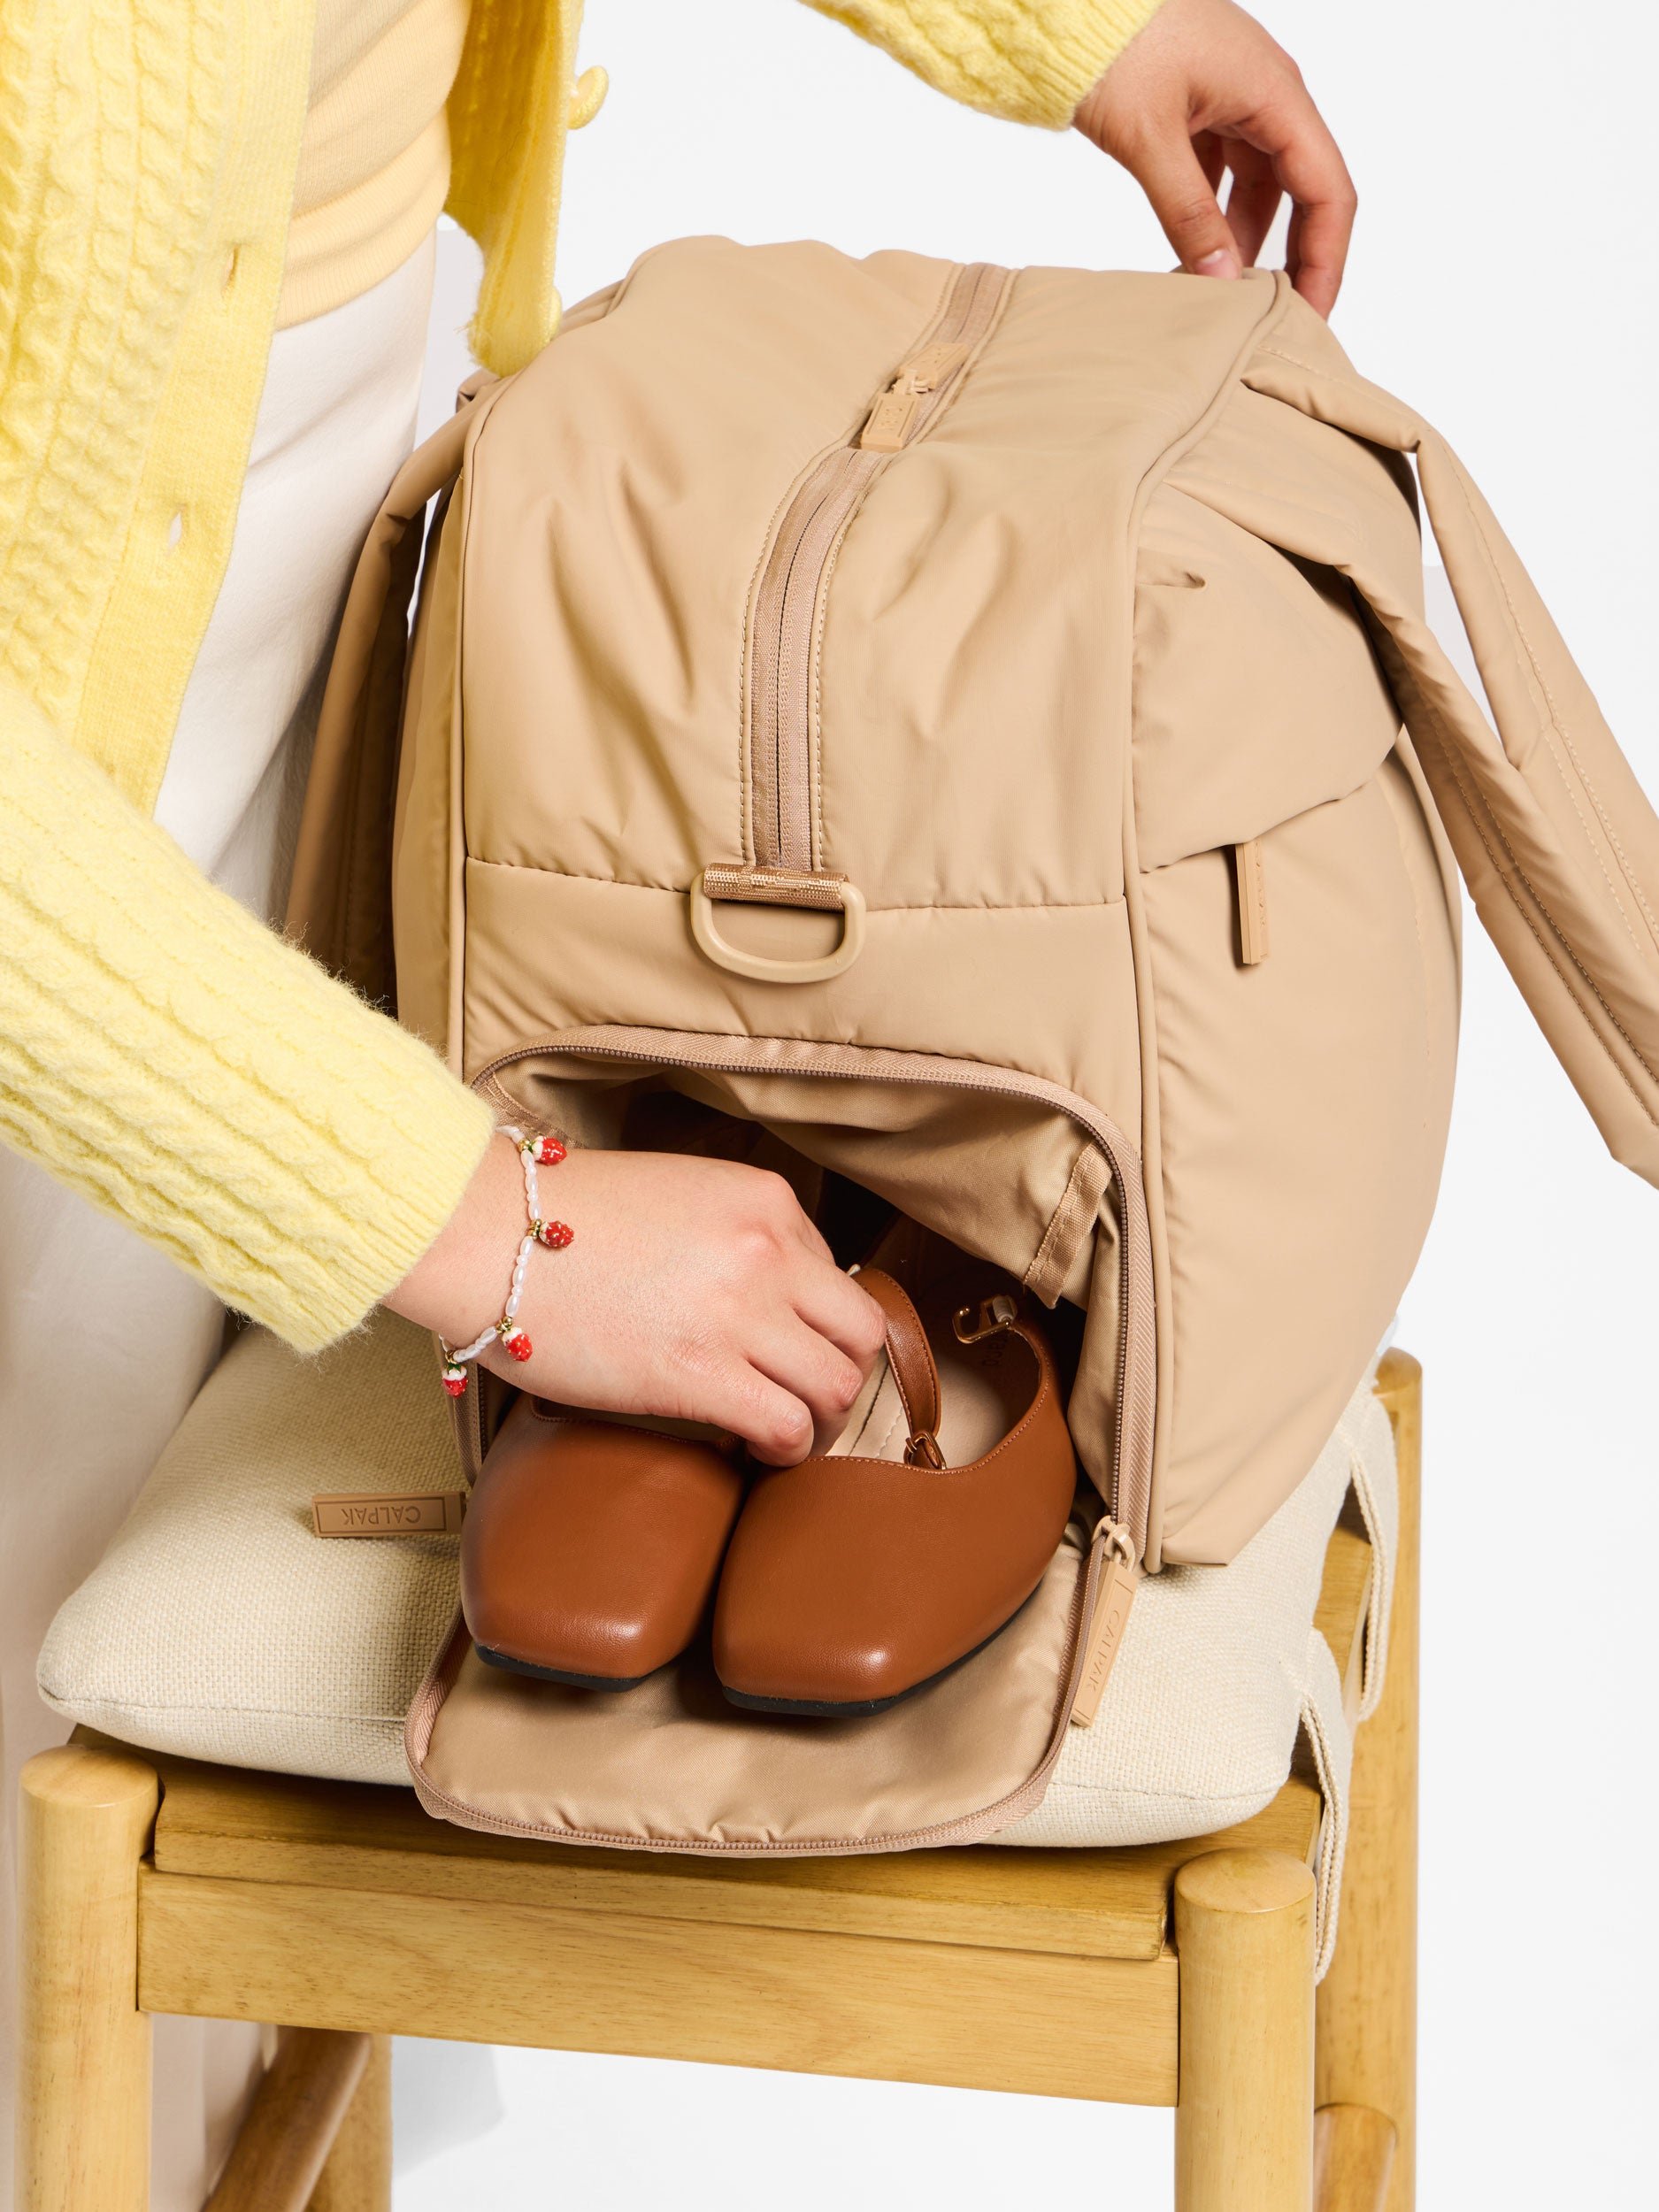 Model placing shoes within shoe compartment of CALPAK luka duffel in light brown